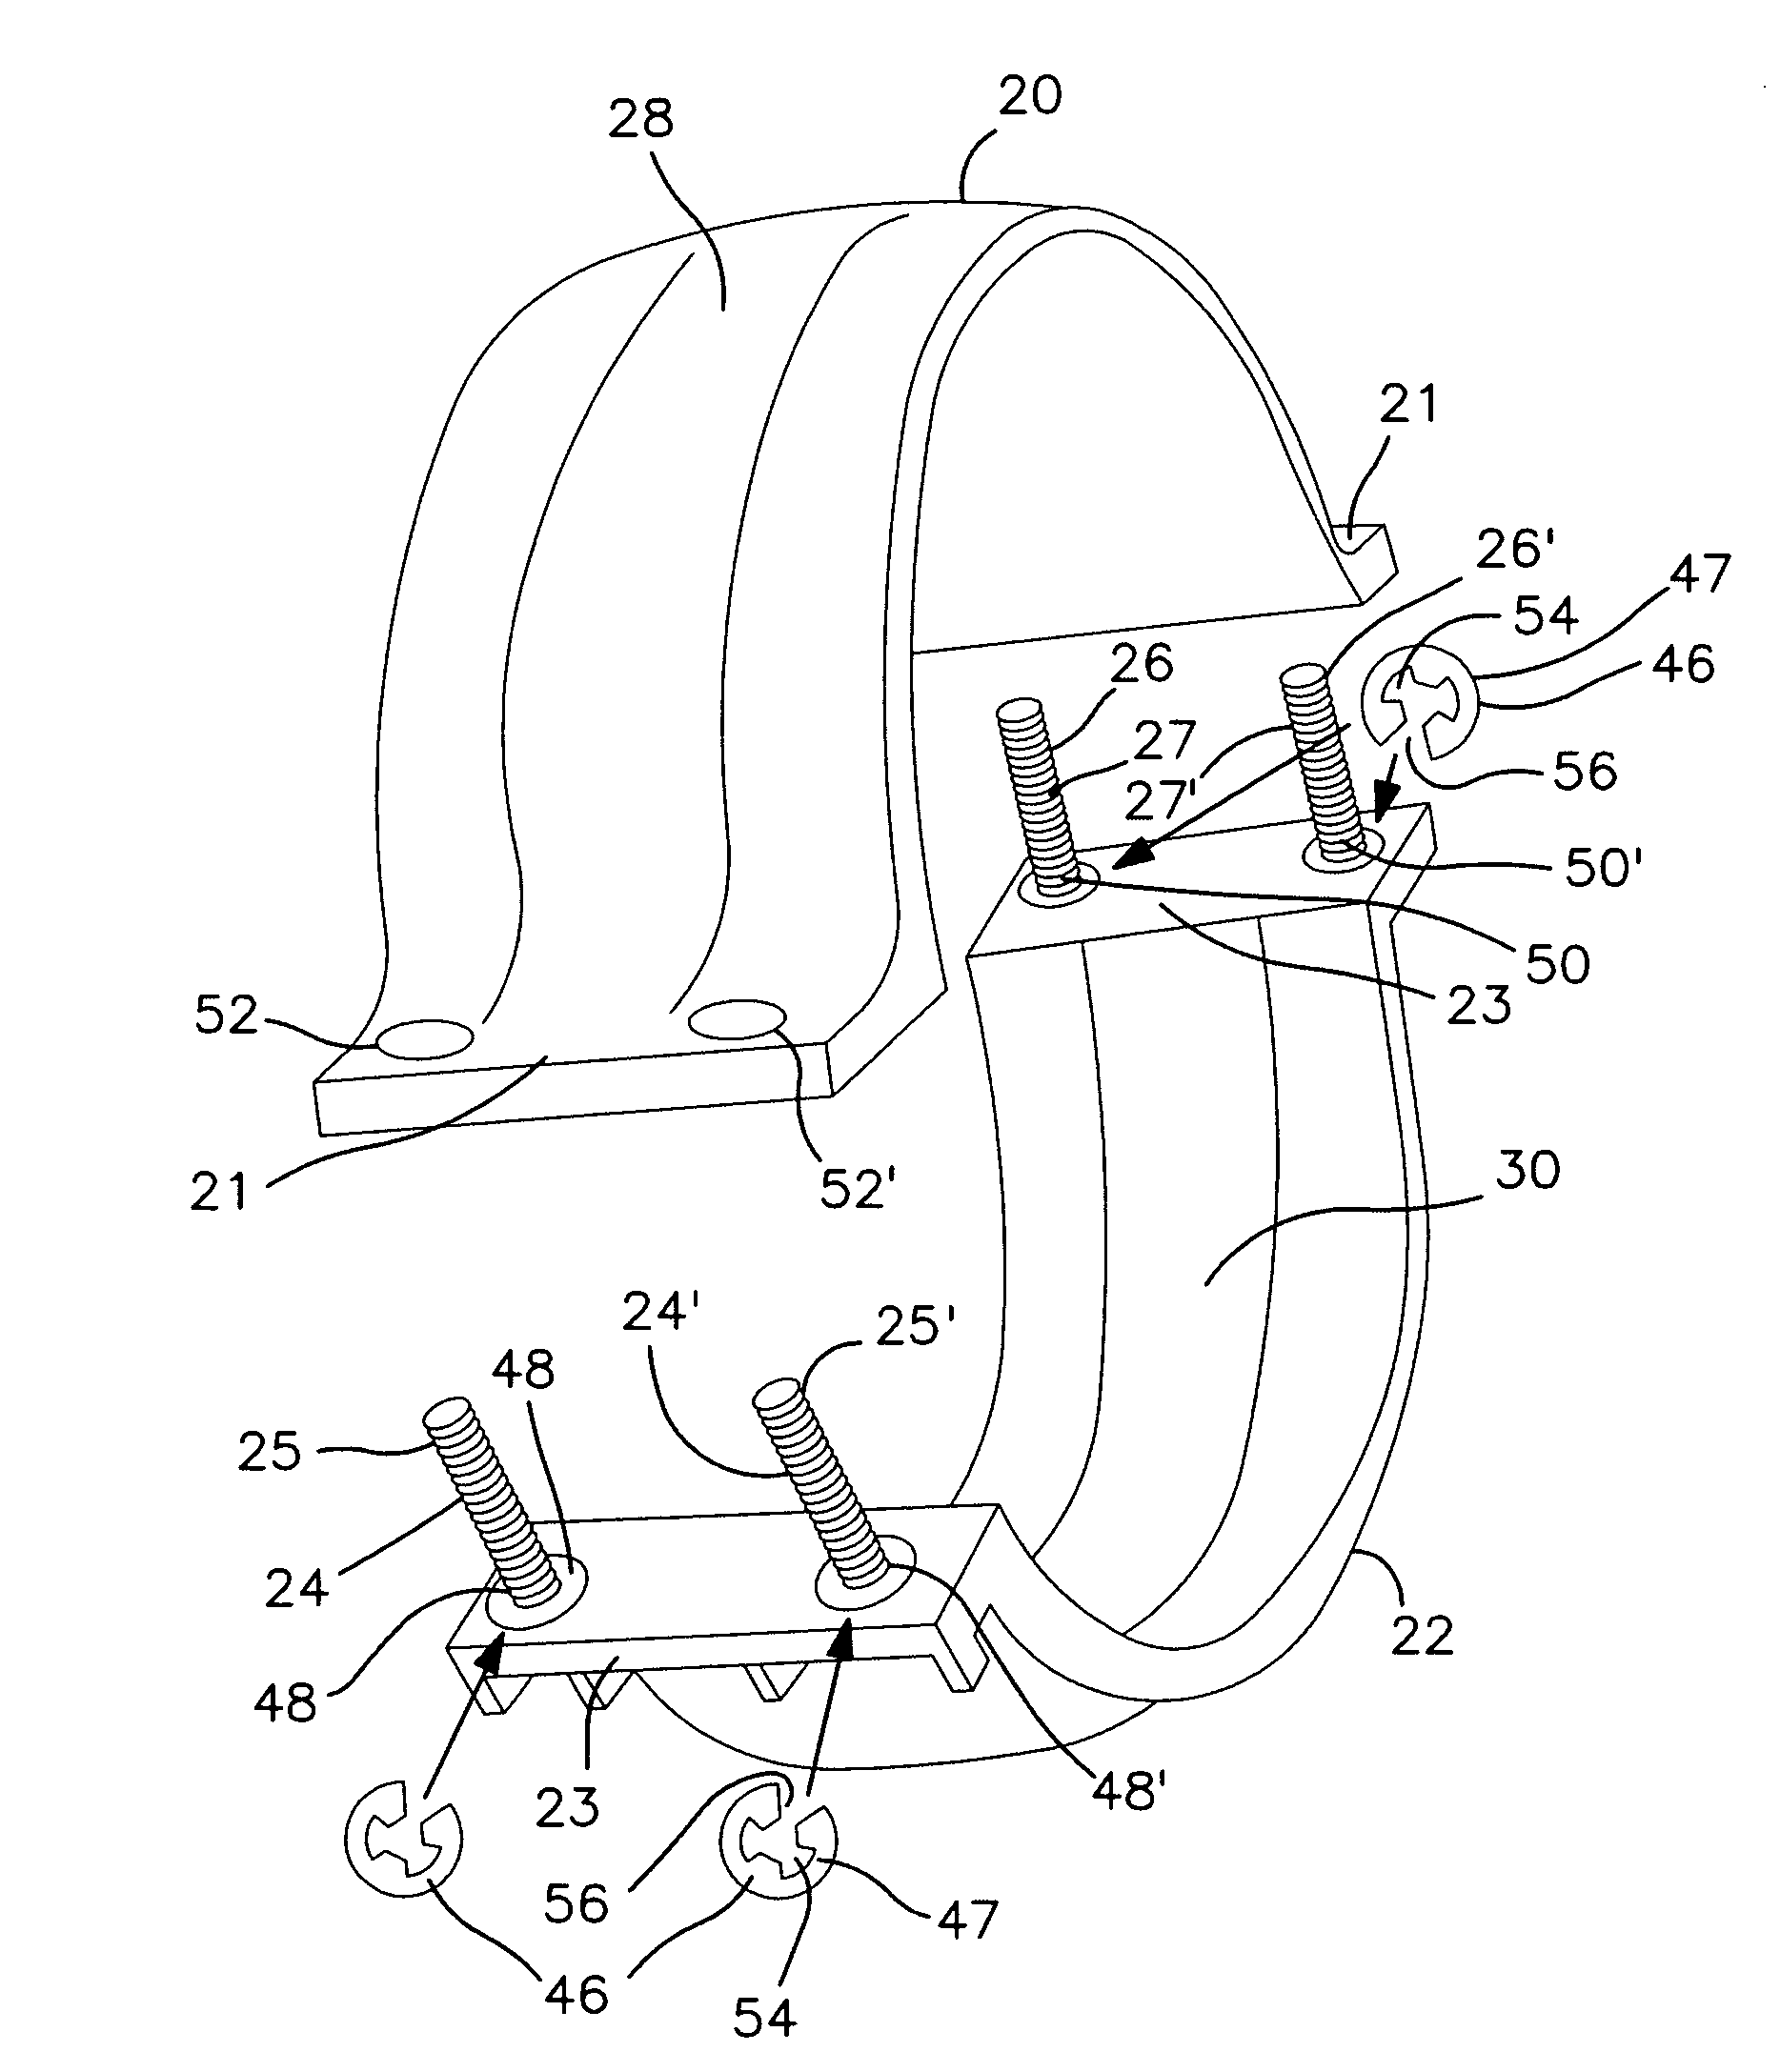 System and method for facilitating pipe and conduit coupling